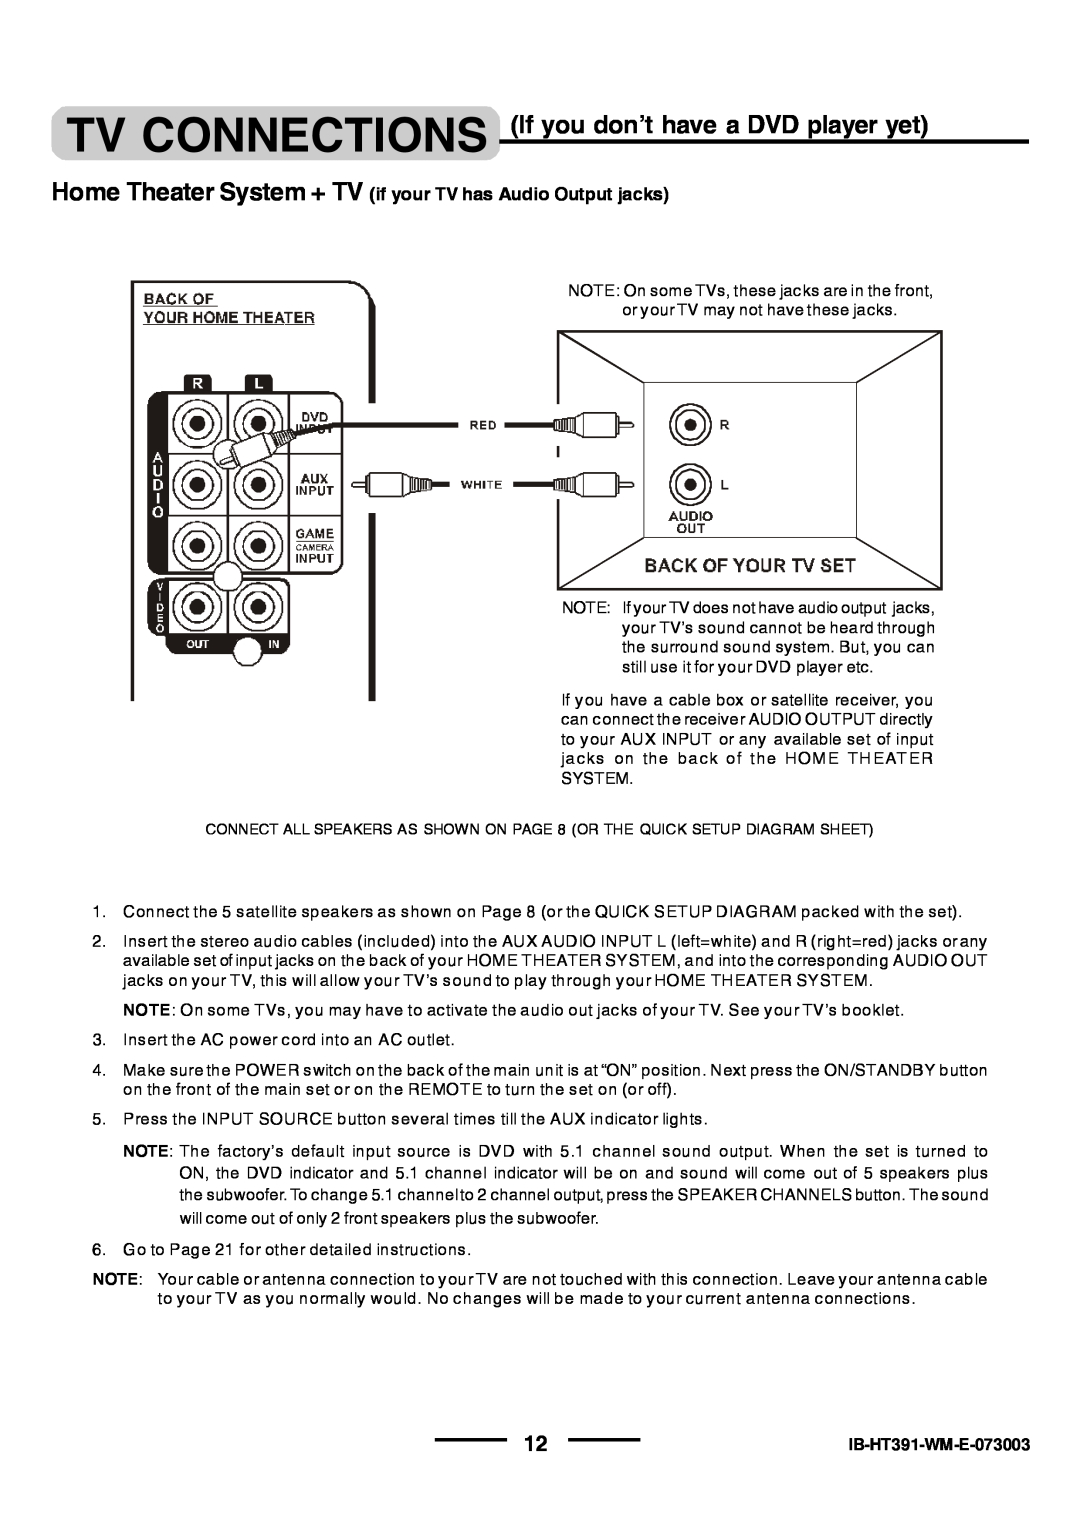 Lenoxx Electronics HT-391 manual TV CONNECTIONS If you don’t have a DVD player yet, IB-HT391-WM-E-073003 